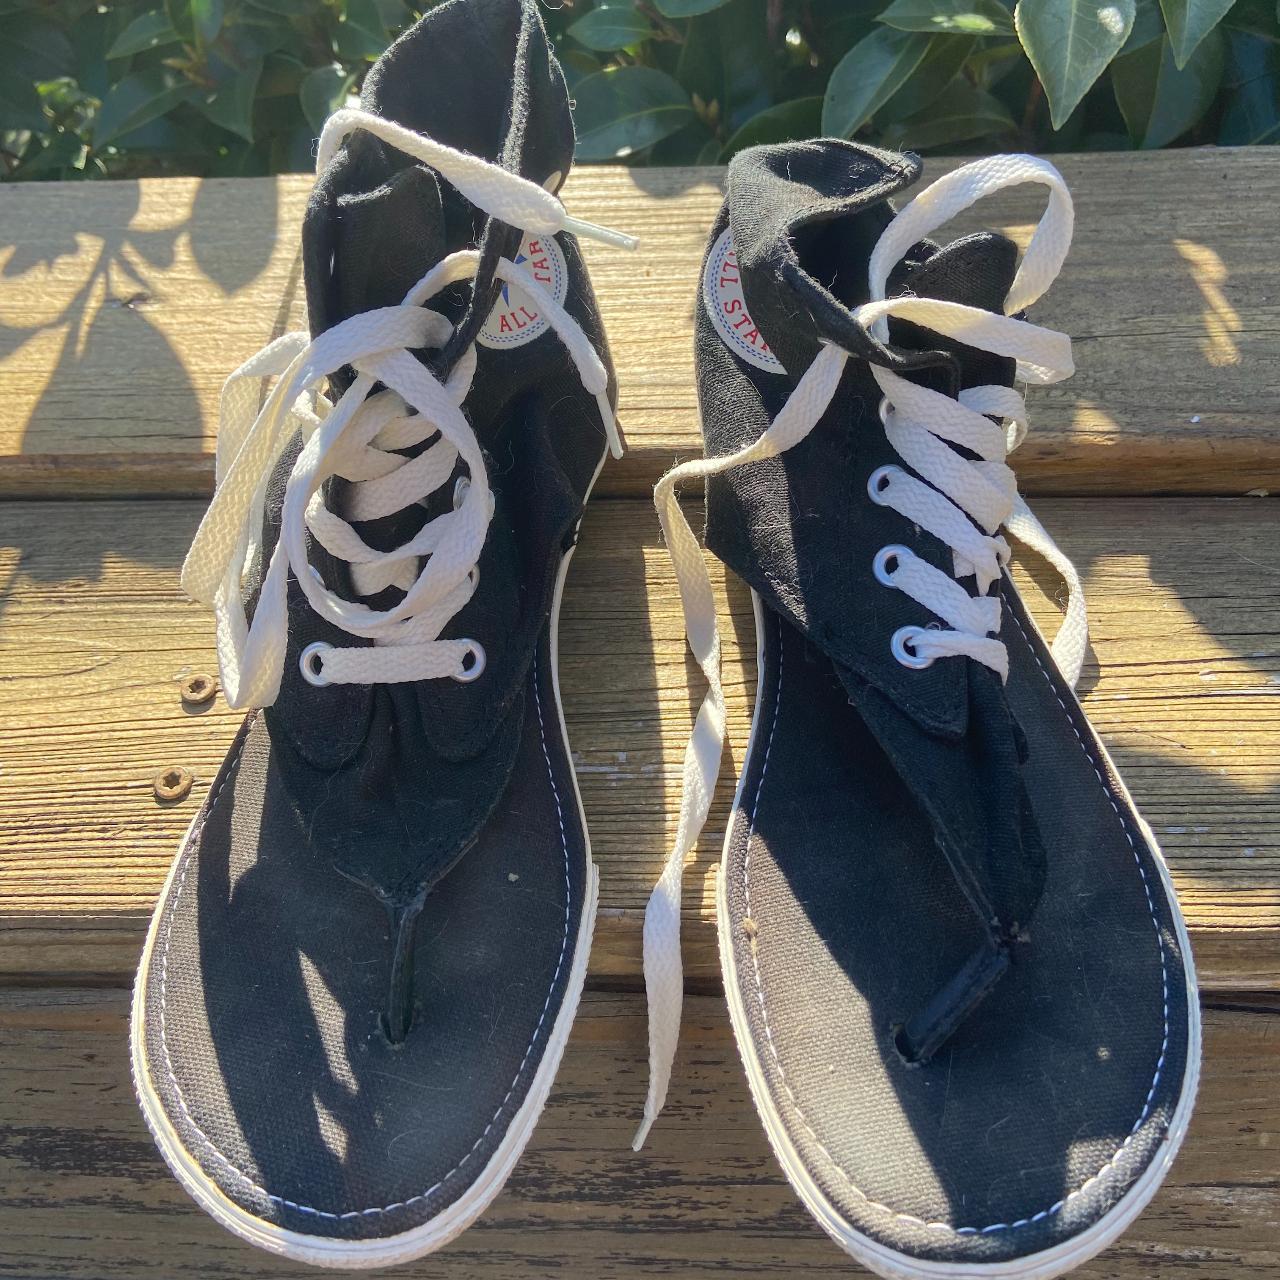 Women's Converse Sandals, New & Used